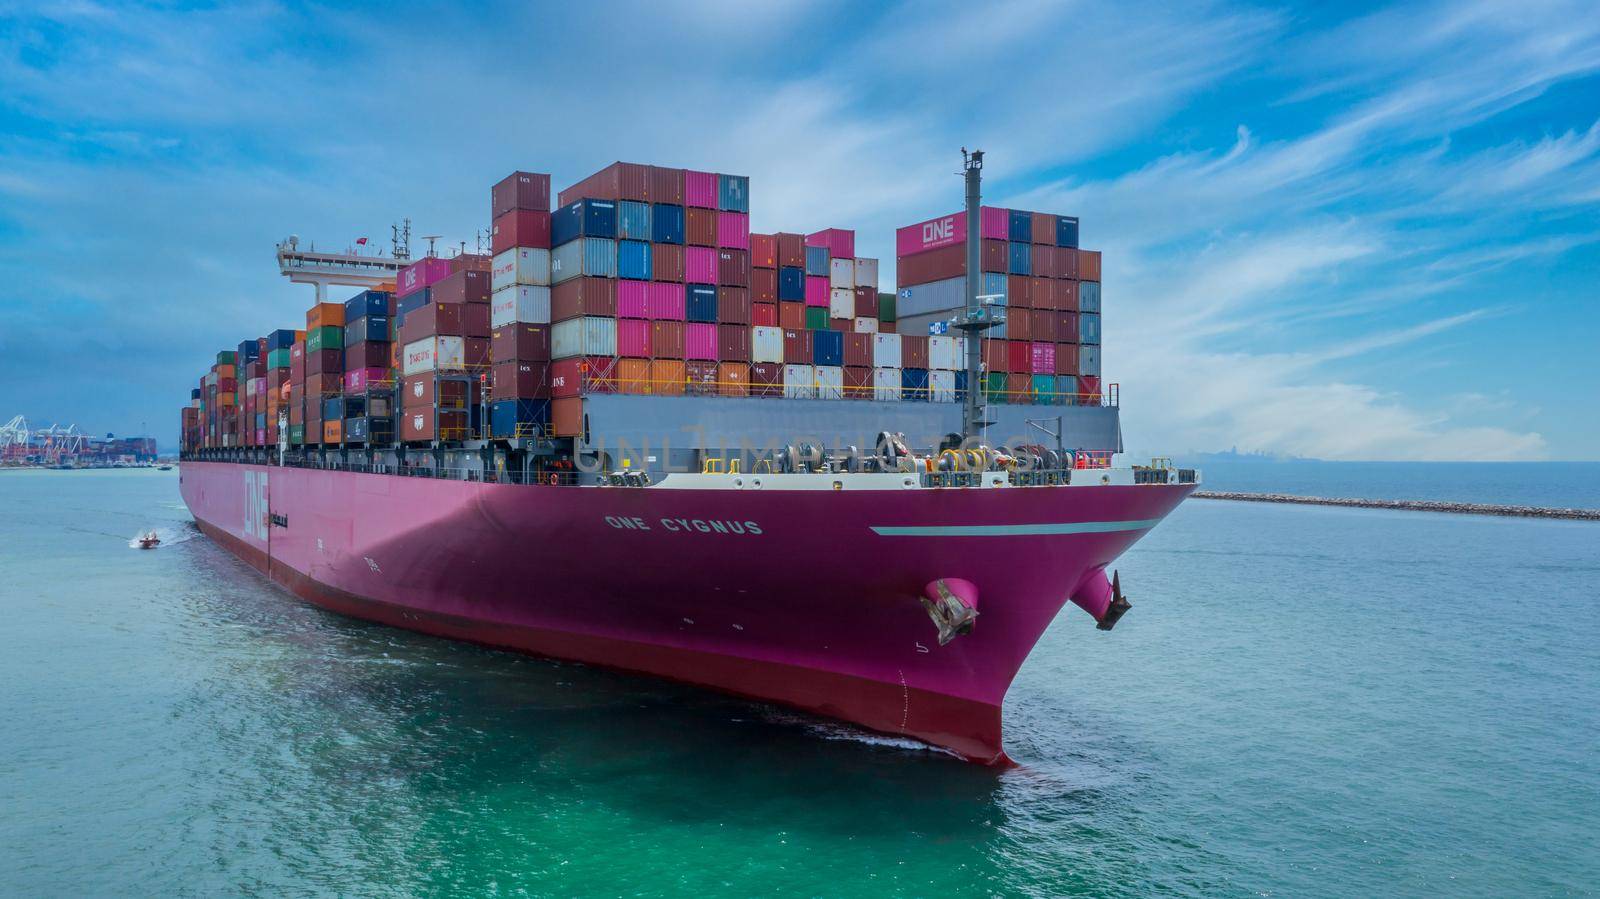 Global business company freight shipping logistics import export transportation by container ship, Container cargo ship at commercial industrial port freight transportation. by AvigatoR